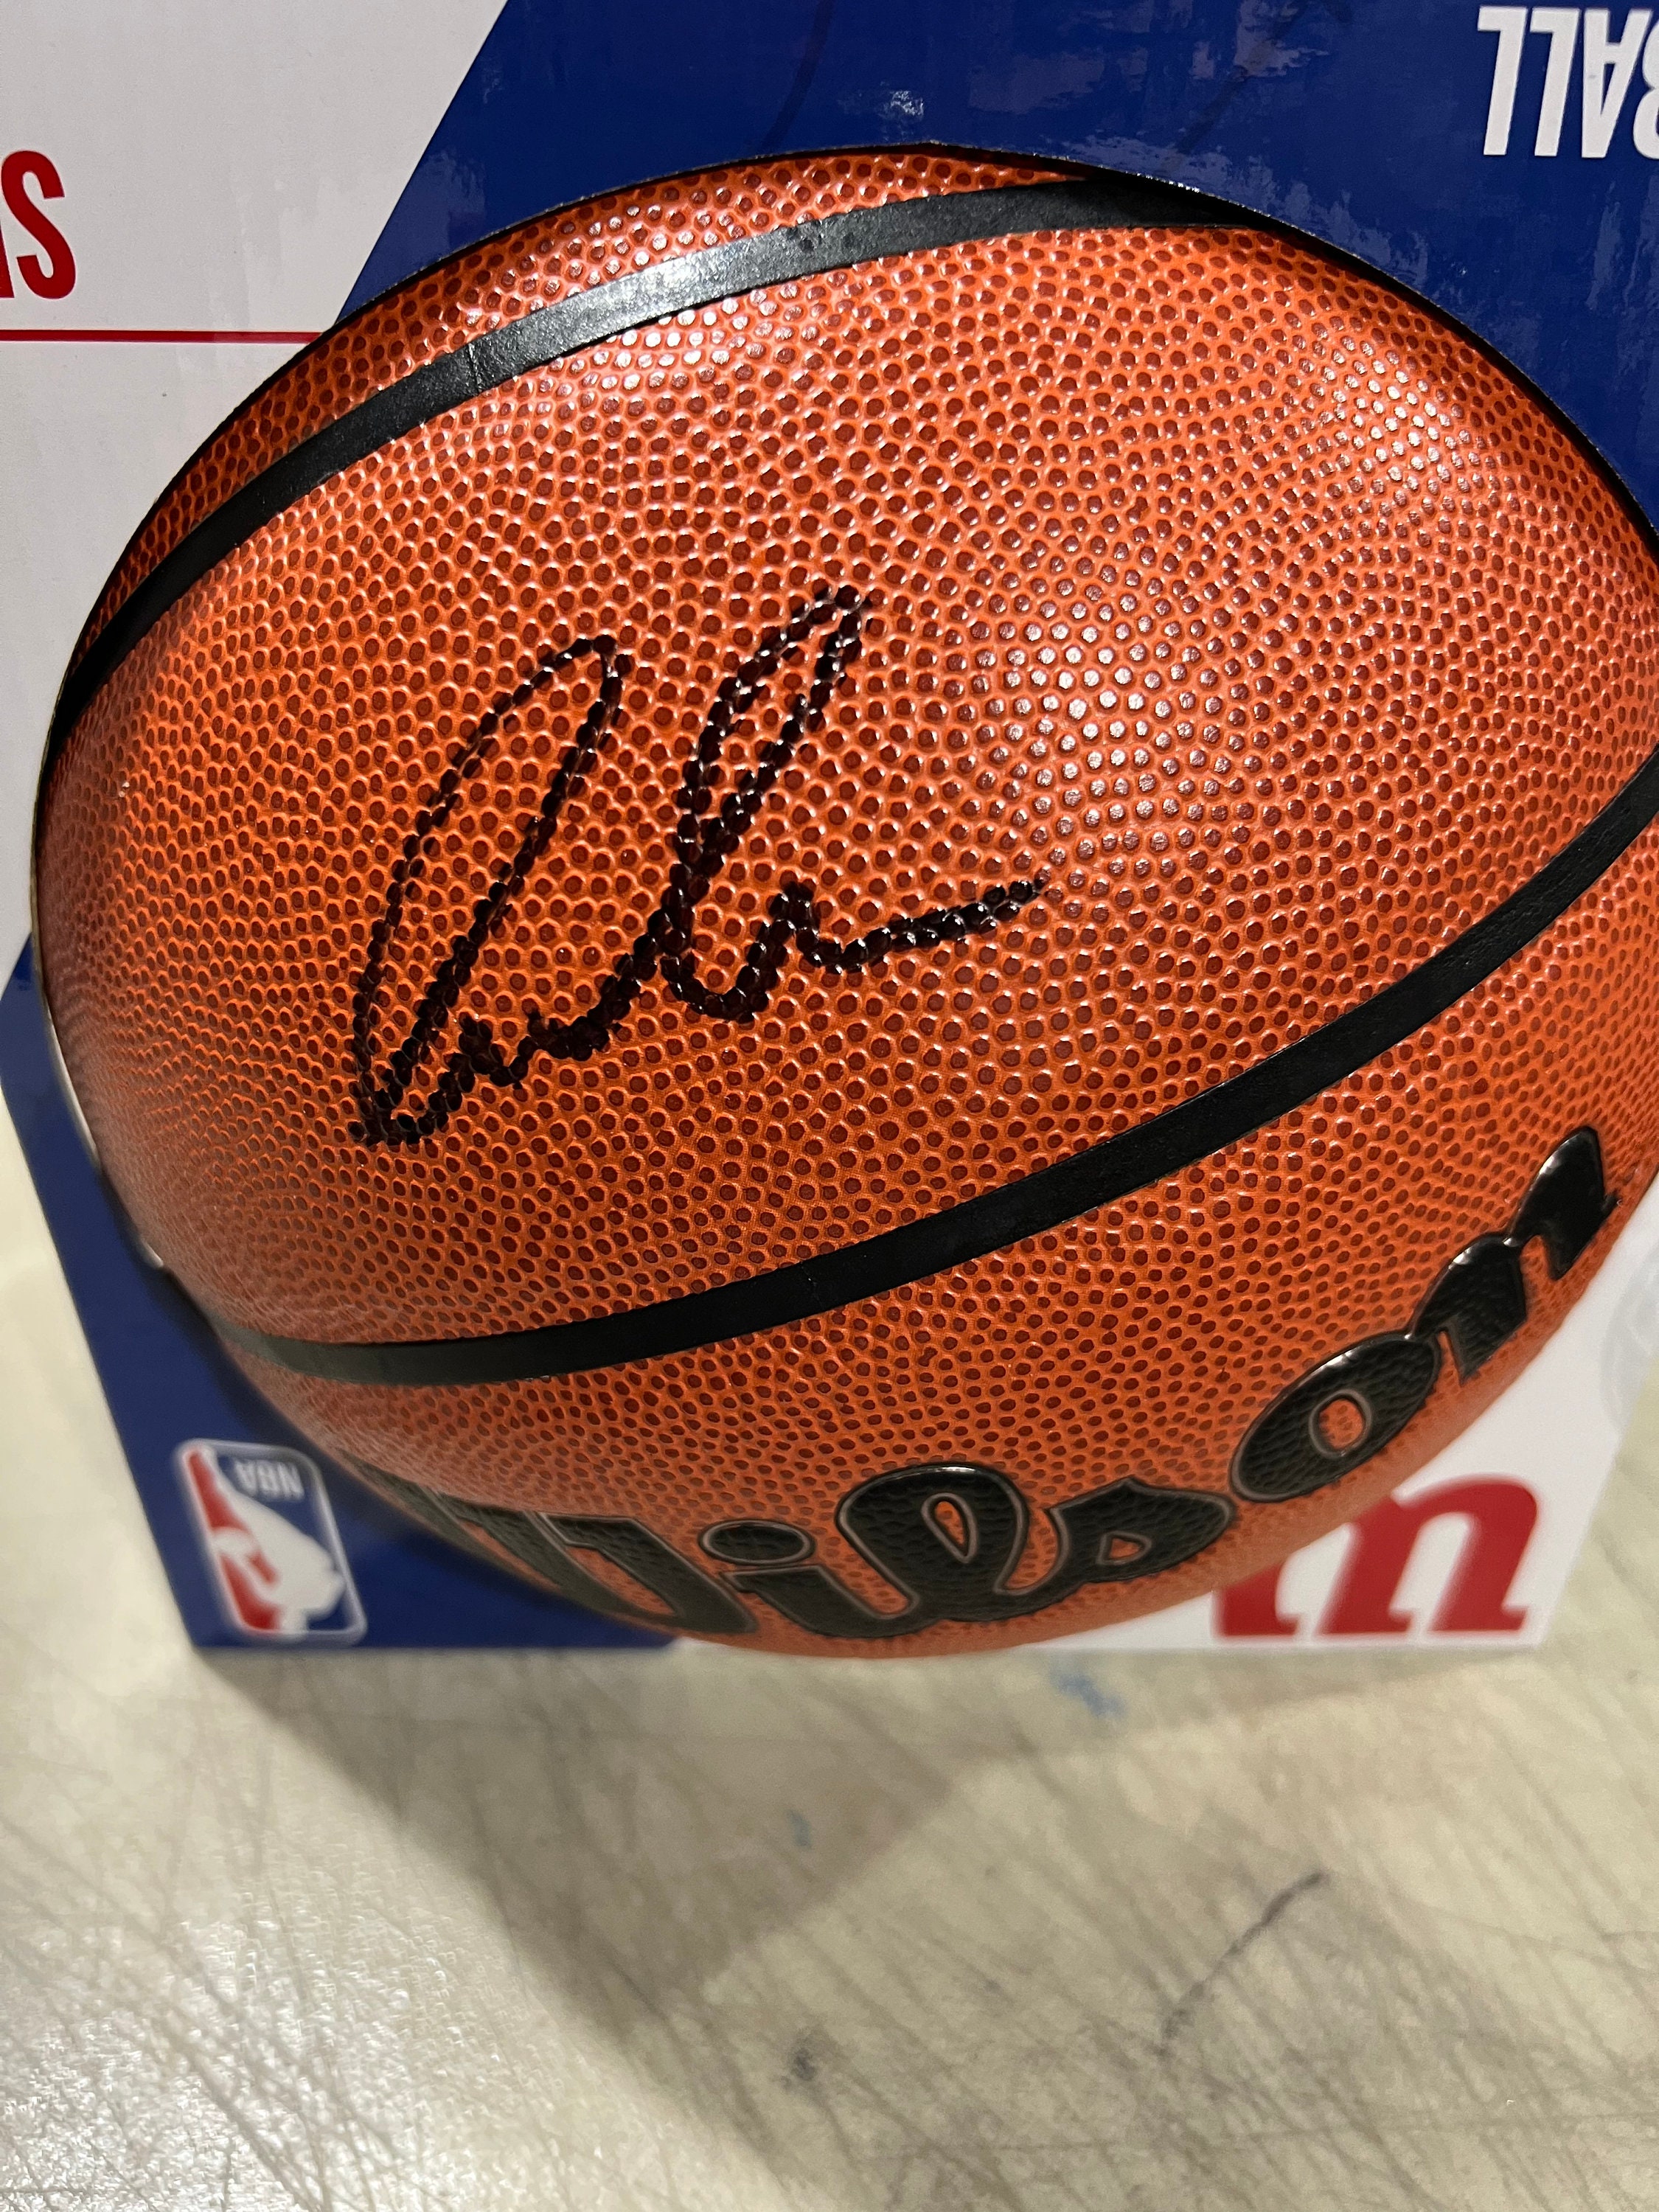 LUKA DONCIC SIGNED DALLAS MAVERICKS ROOKIE OF THE YEAR BASKETBALL